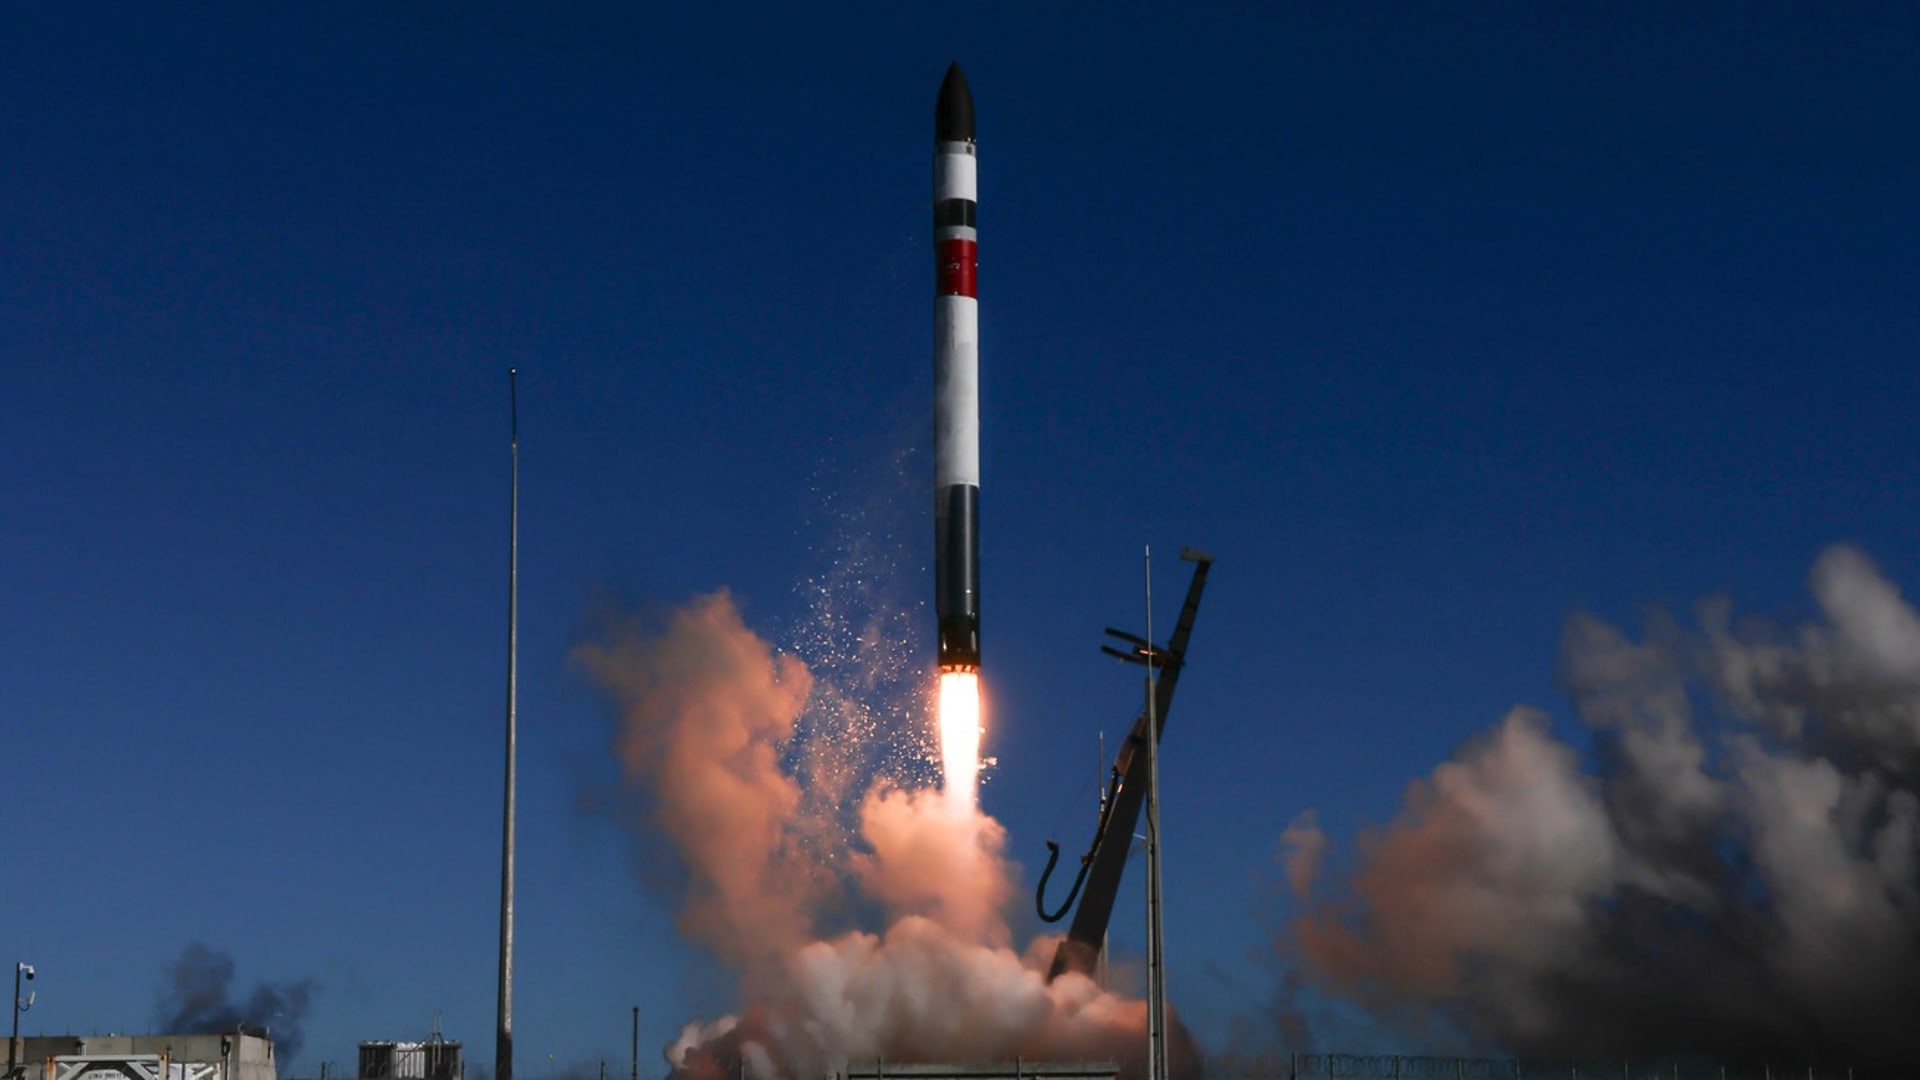 Rocket Lab says contract backlog tops $1 billion, outlines Neutron progress toward first launch